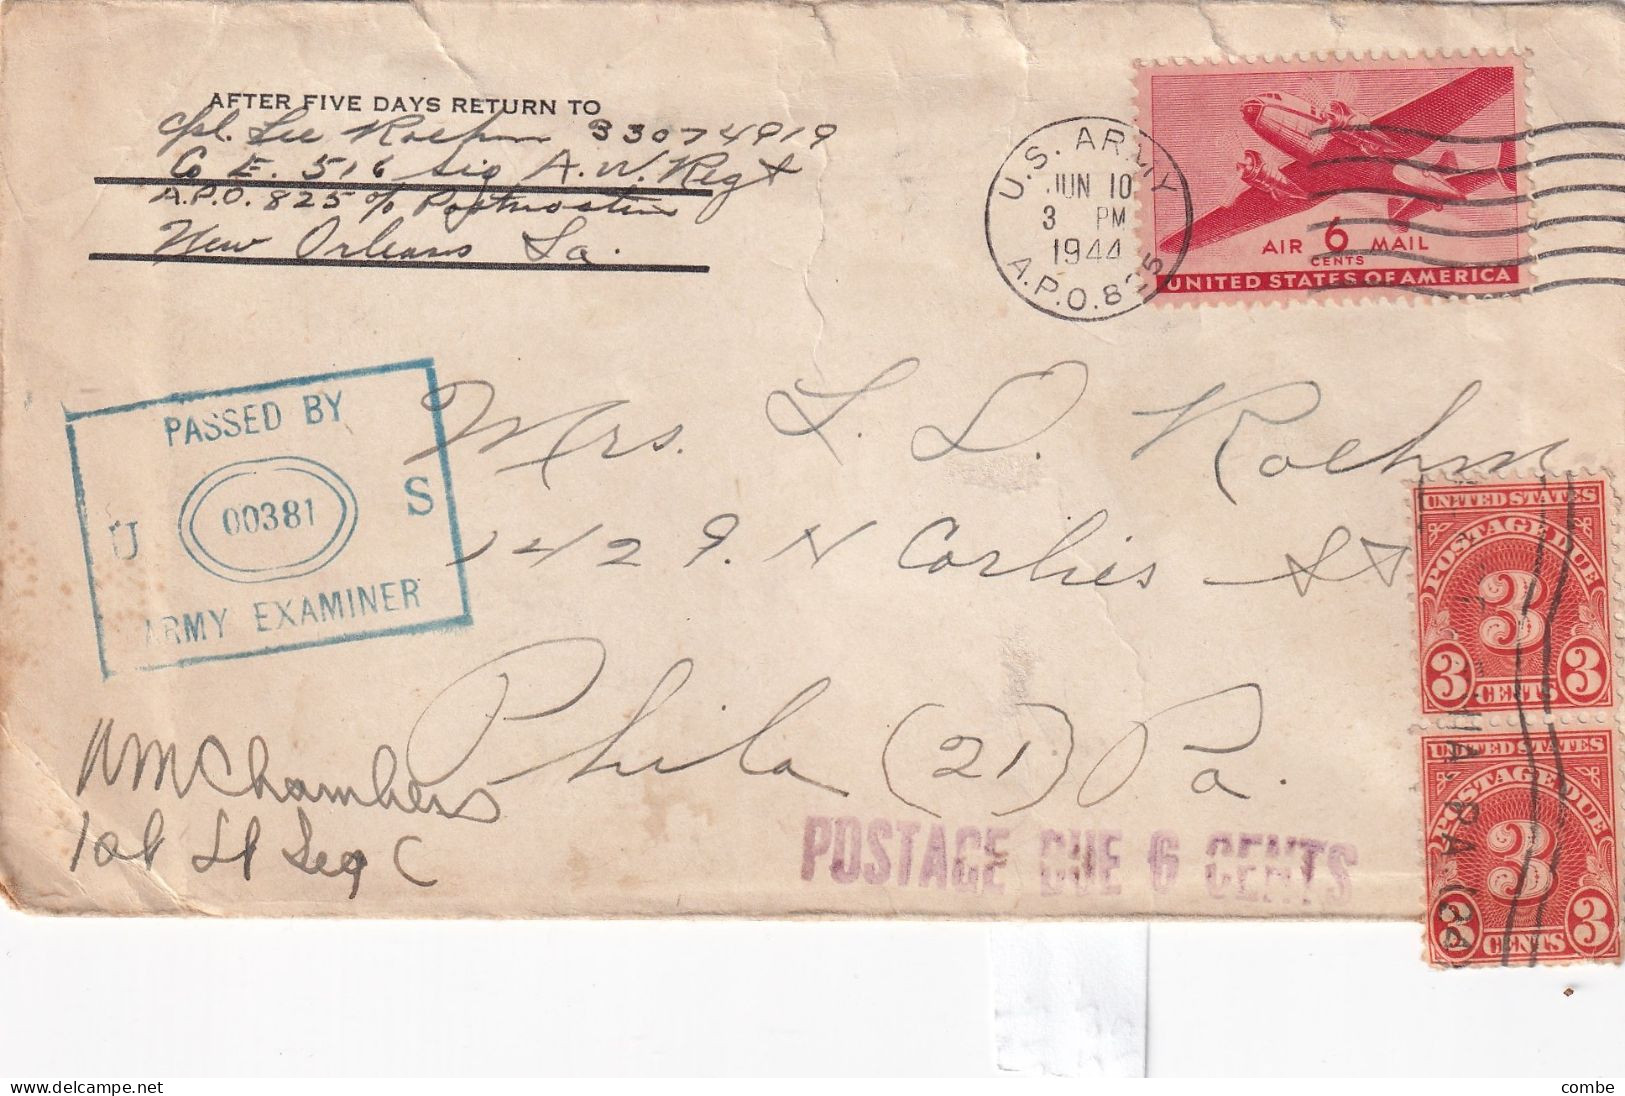 COVER US. 3 JUN 1944. APO 825. ALBROOK FIELD. CANAL ZONE. TO PHILA. PASSED BY EXAMINER. POSTAGE DUE 6 CENTS - Covers & Documents